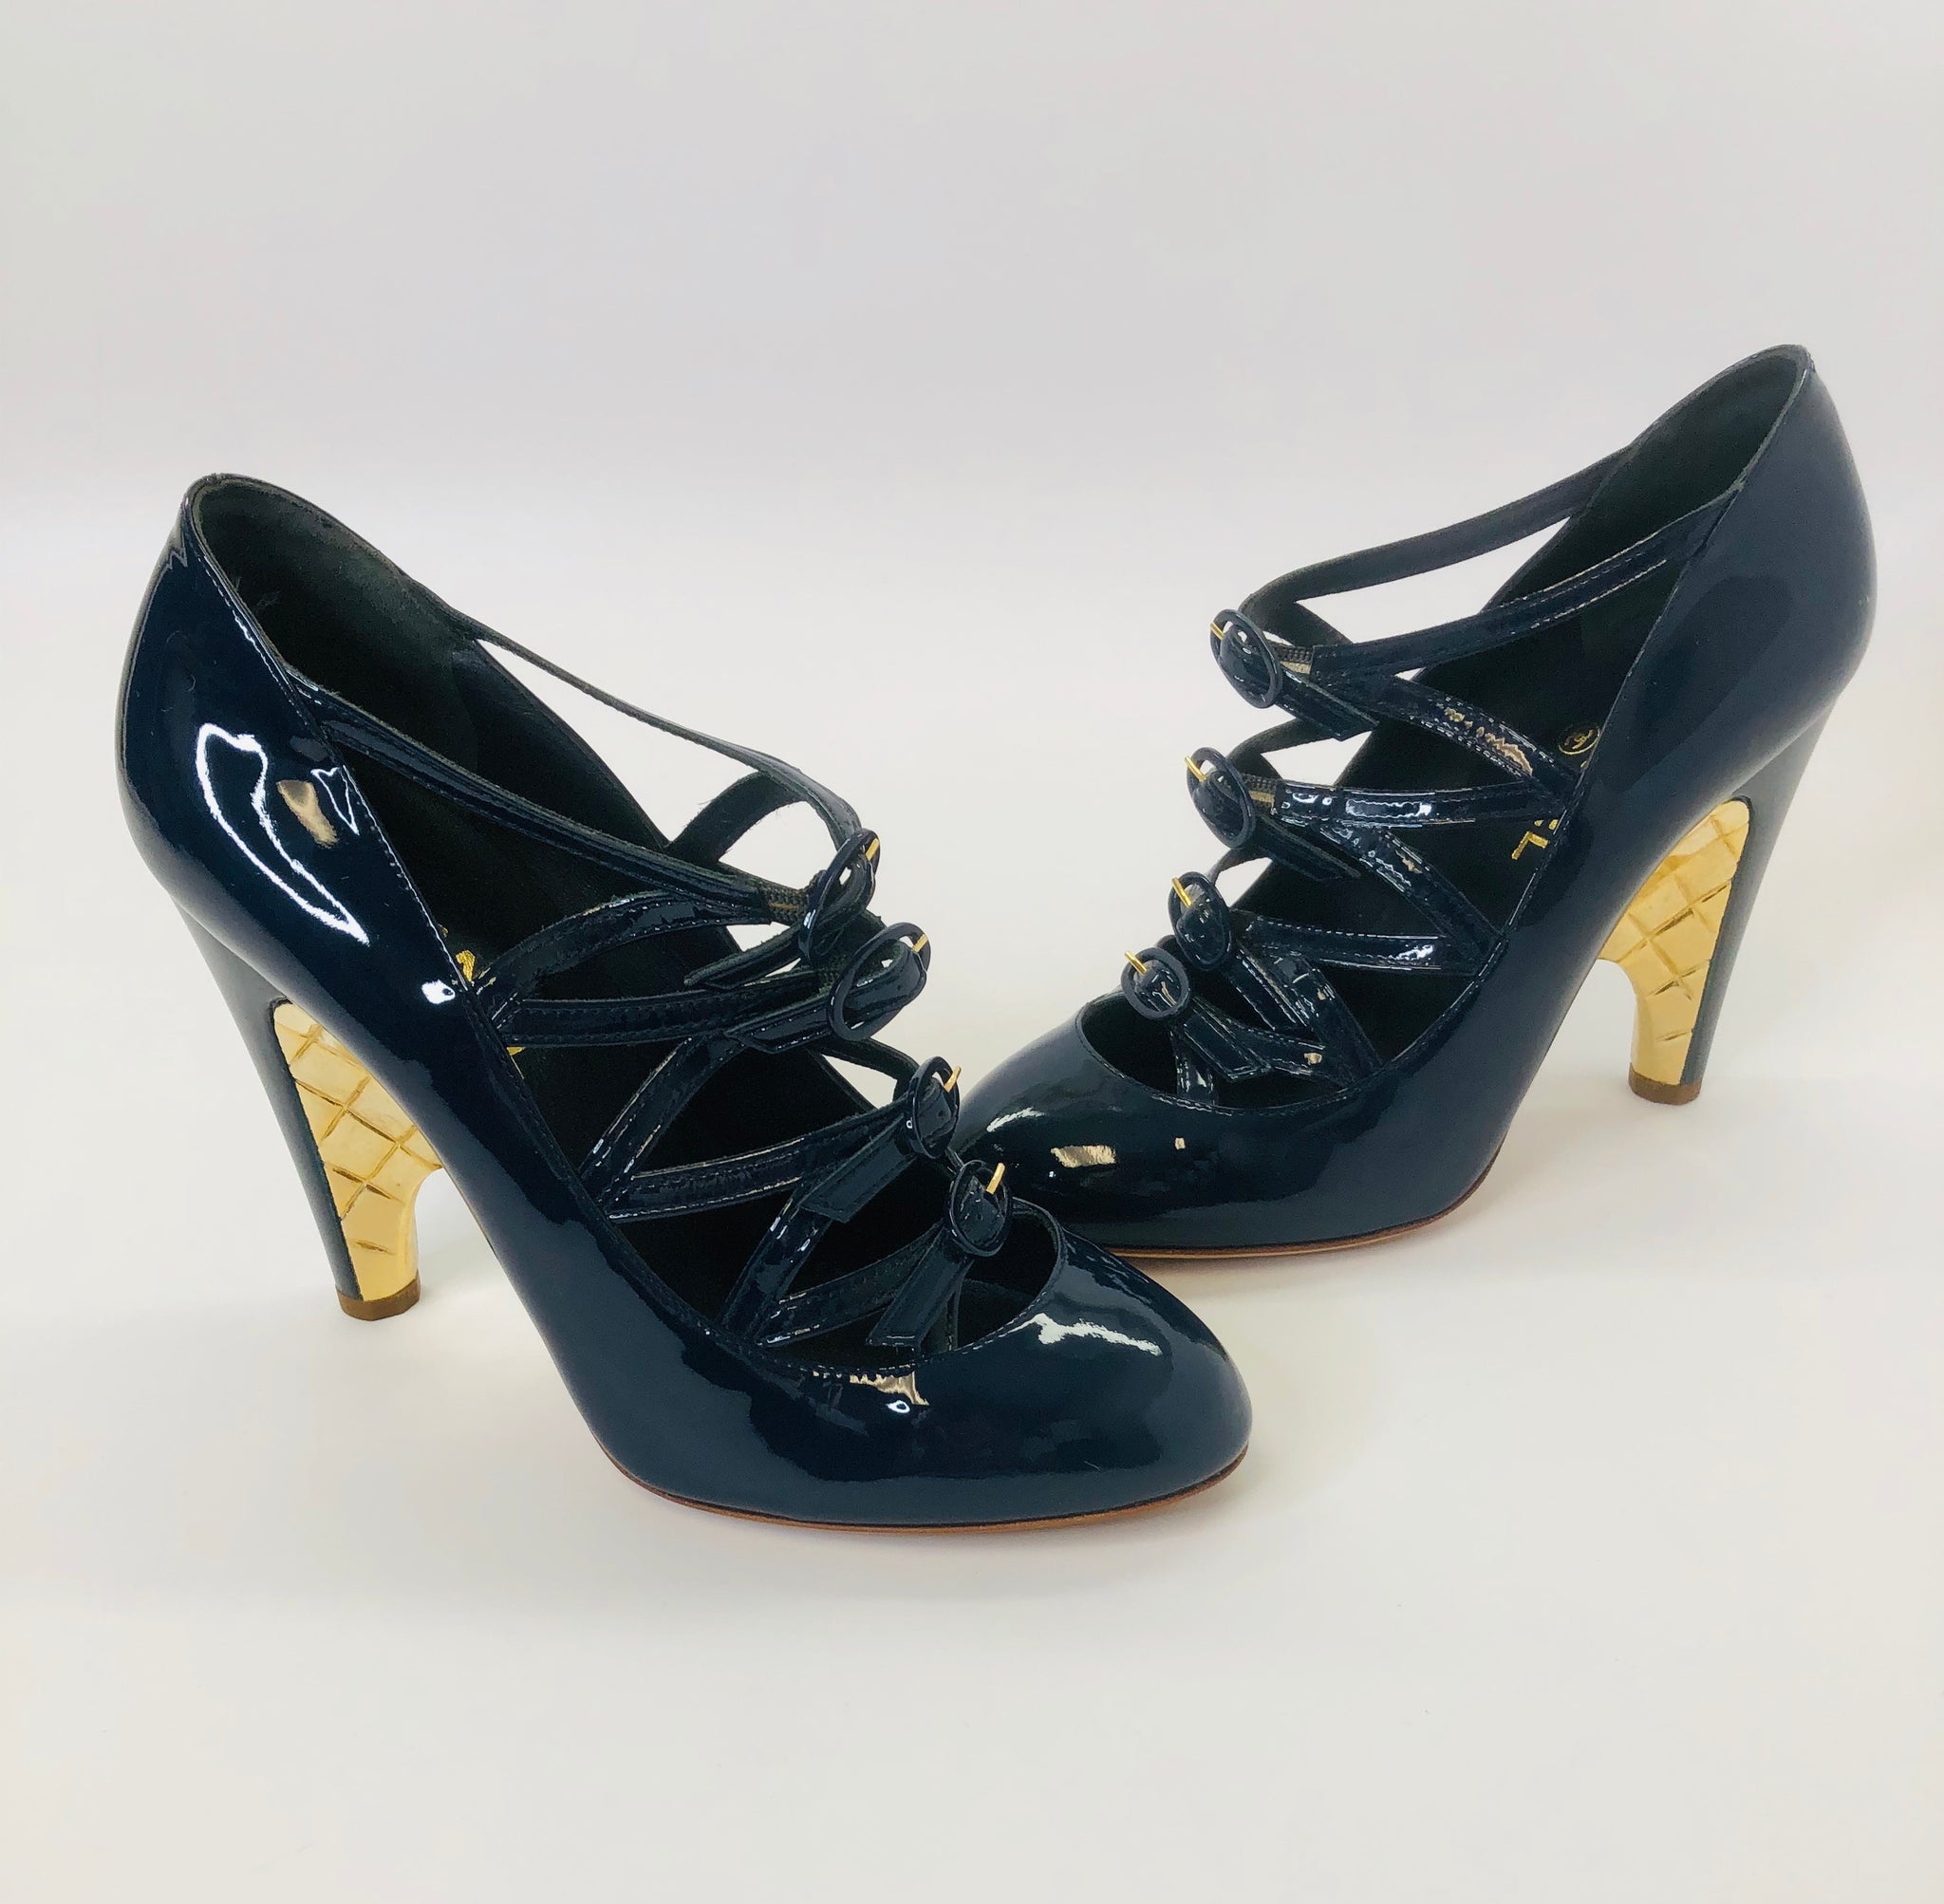 CHANEL Navy Blue Patent Leather and Gold Pumps size 38 1/2 – JDEX Styles